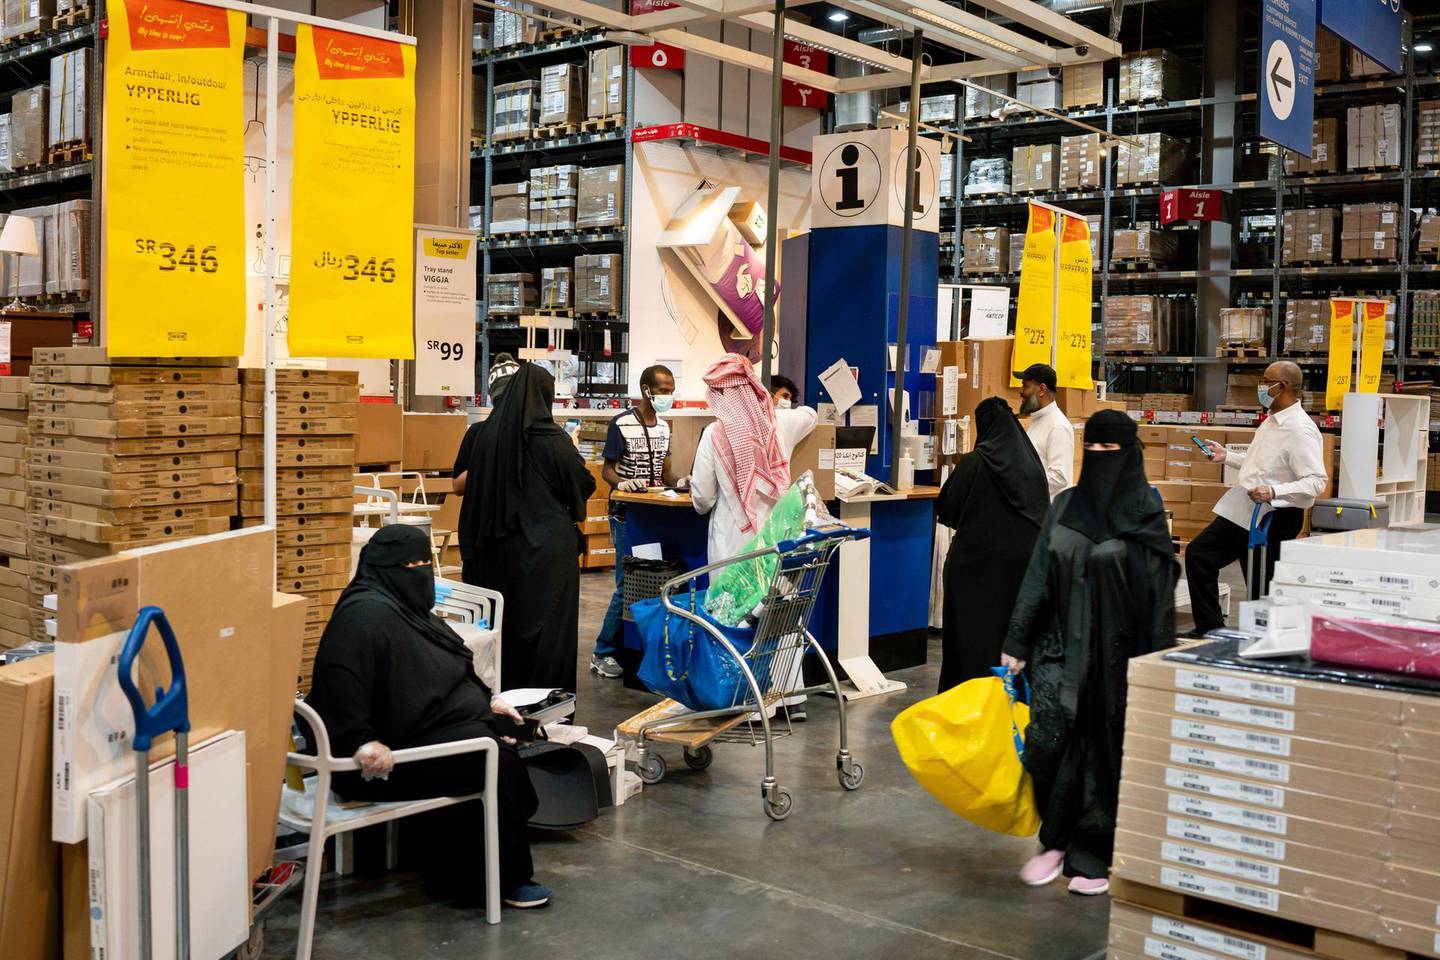 Customers wear protective face masks while shopping in an Ikea AB store in Riyadh, Saudi Arabia, on Tuesday, May 19. 2020. Before the pandemic, most shops, pharmacies and gas stations in the kingdom halted for at least 30 minutes for each prayer session, the only country that enforced such closures. Photographer: Tasneem Alsultan/Bloomberg